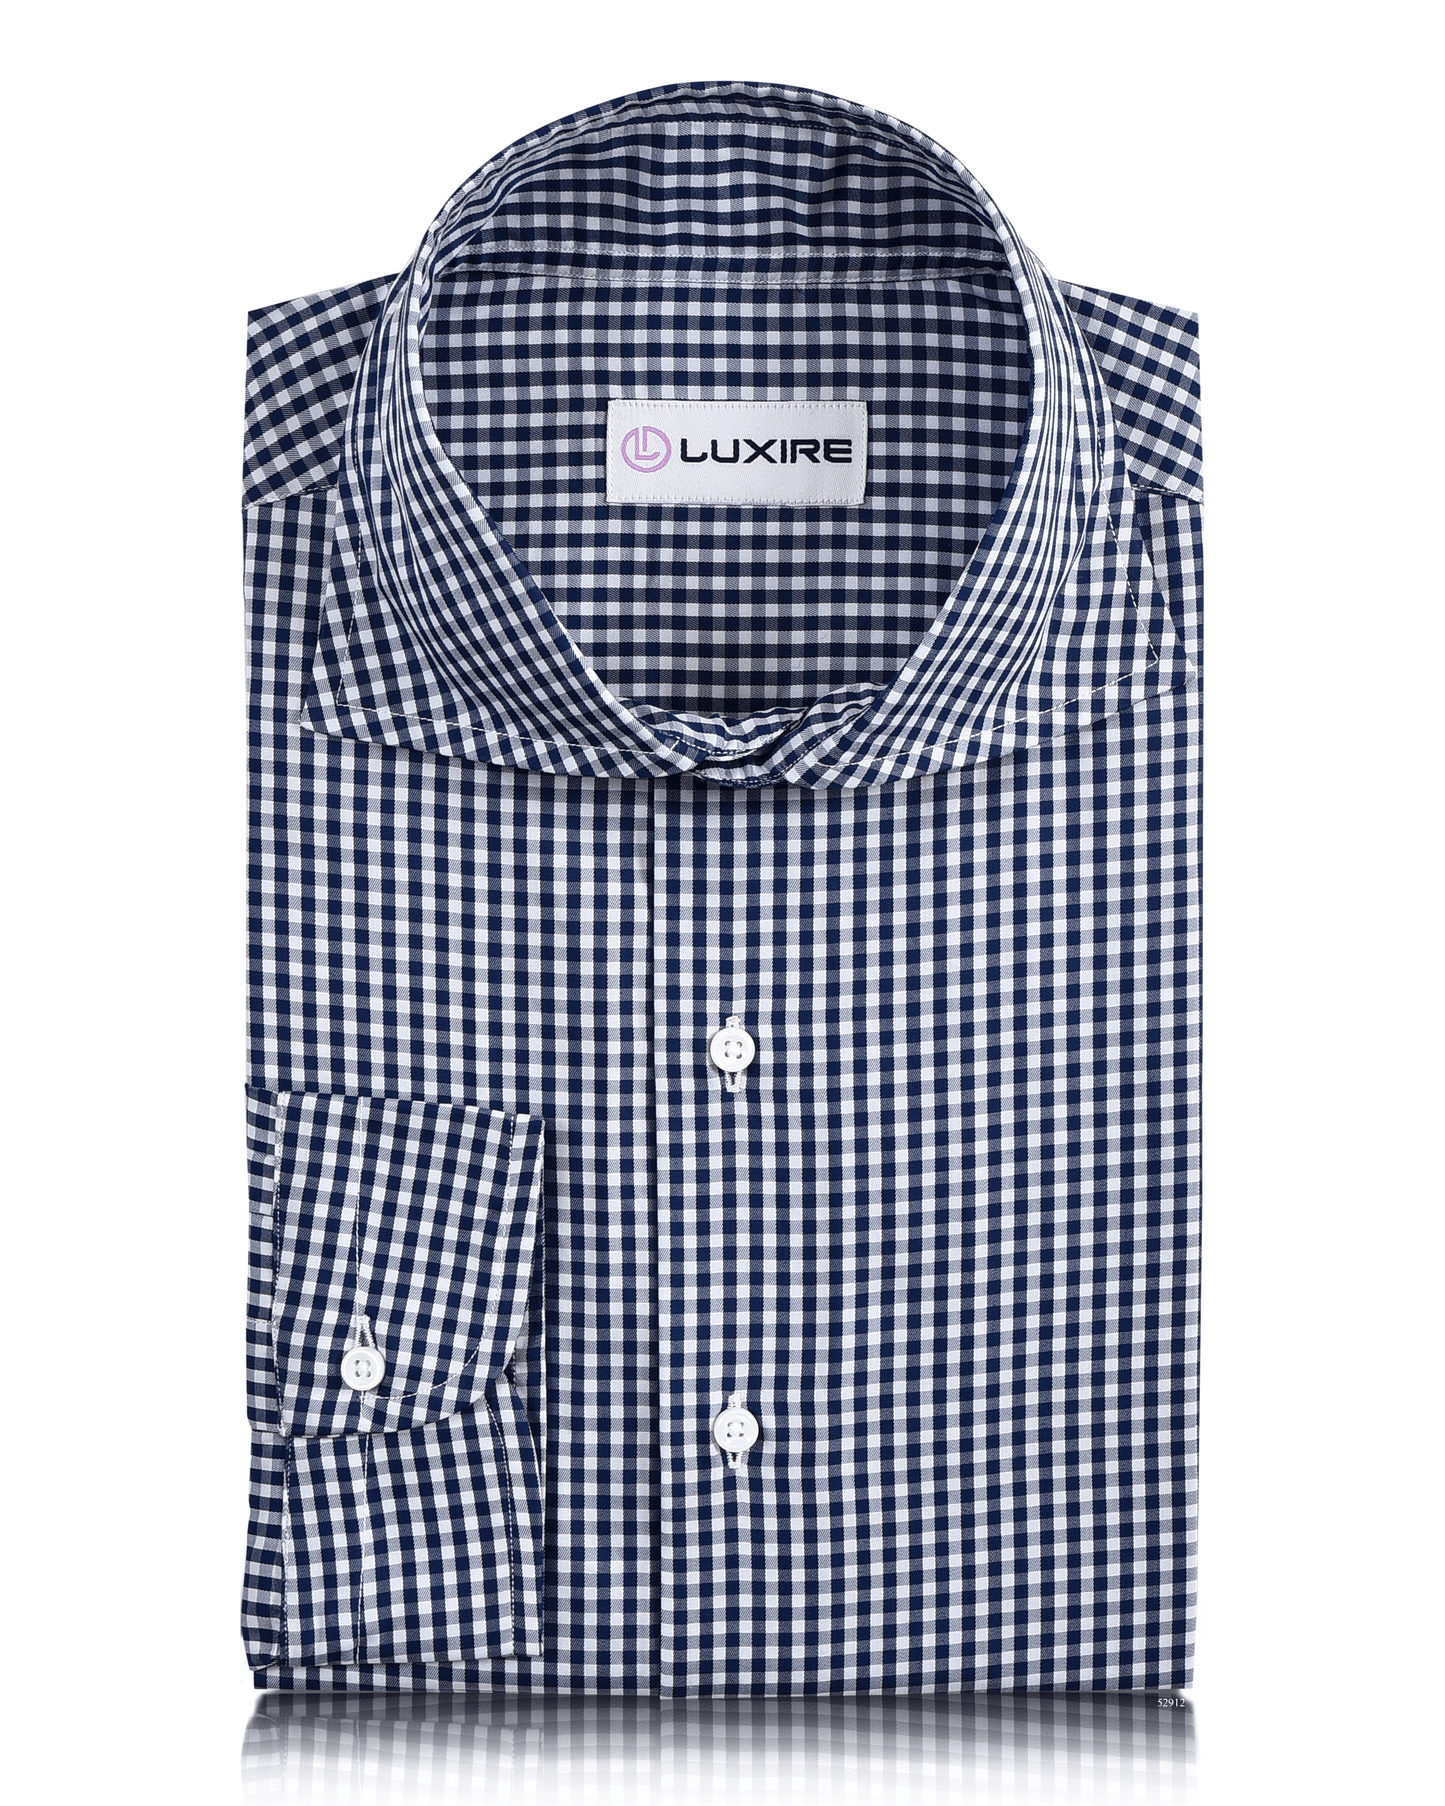 Front view of custom check shirts for men by Luxire dark denim blue on white